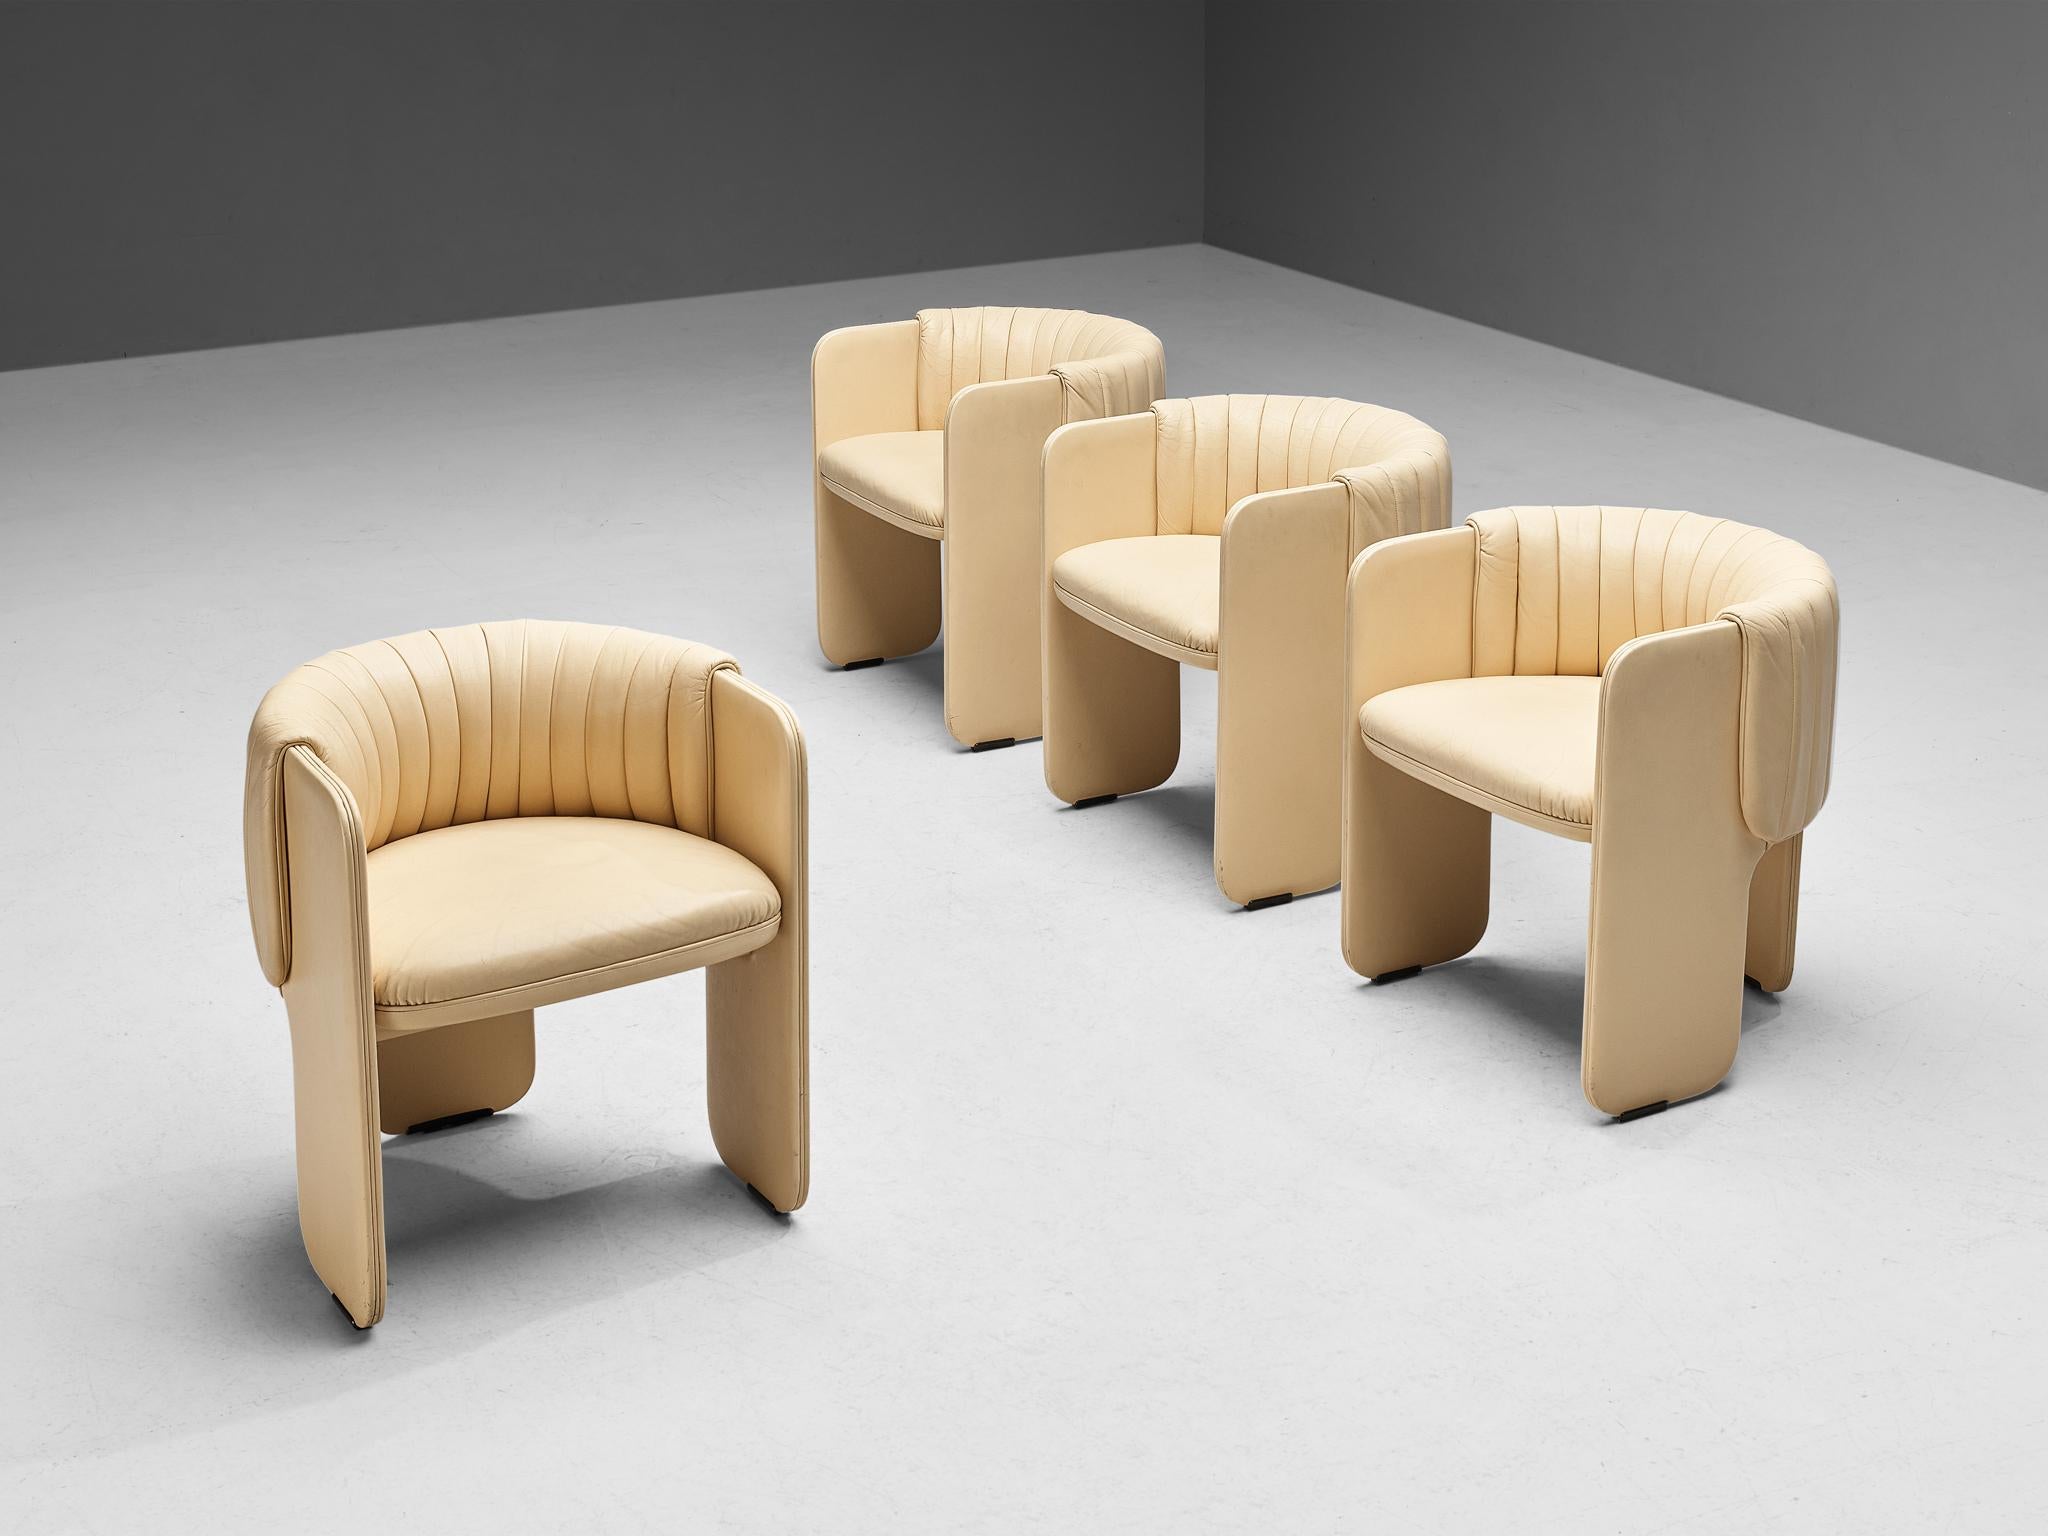 Luigi Massoni for Poltrona Frau, set of four armchairs model ‘Dinette’, leather, Italy, 1972.

This set of armchairs epitomizes a splendid construction based on characteristic shapes and executed in a beige cream leather. Therefore, this set can be